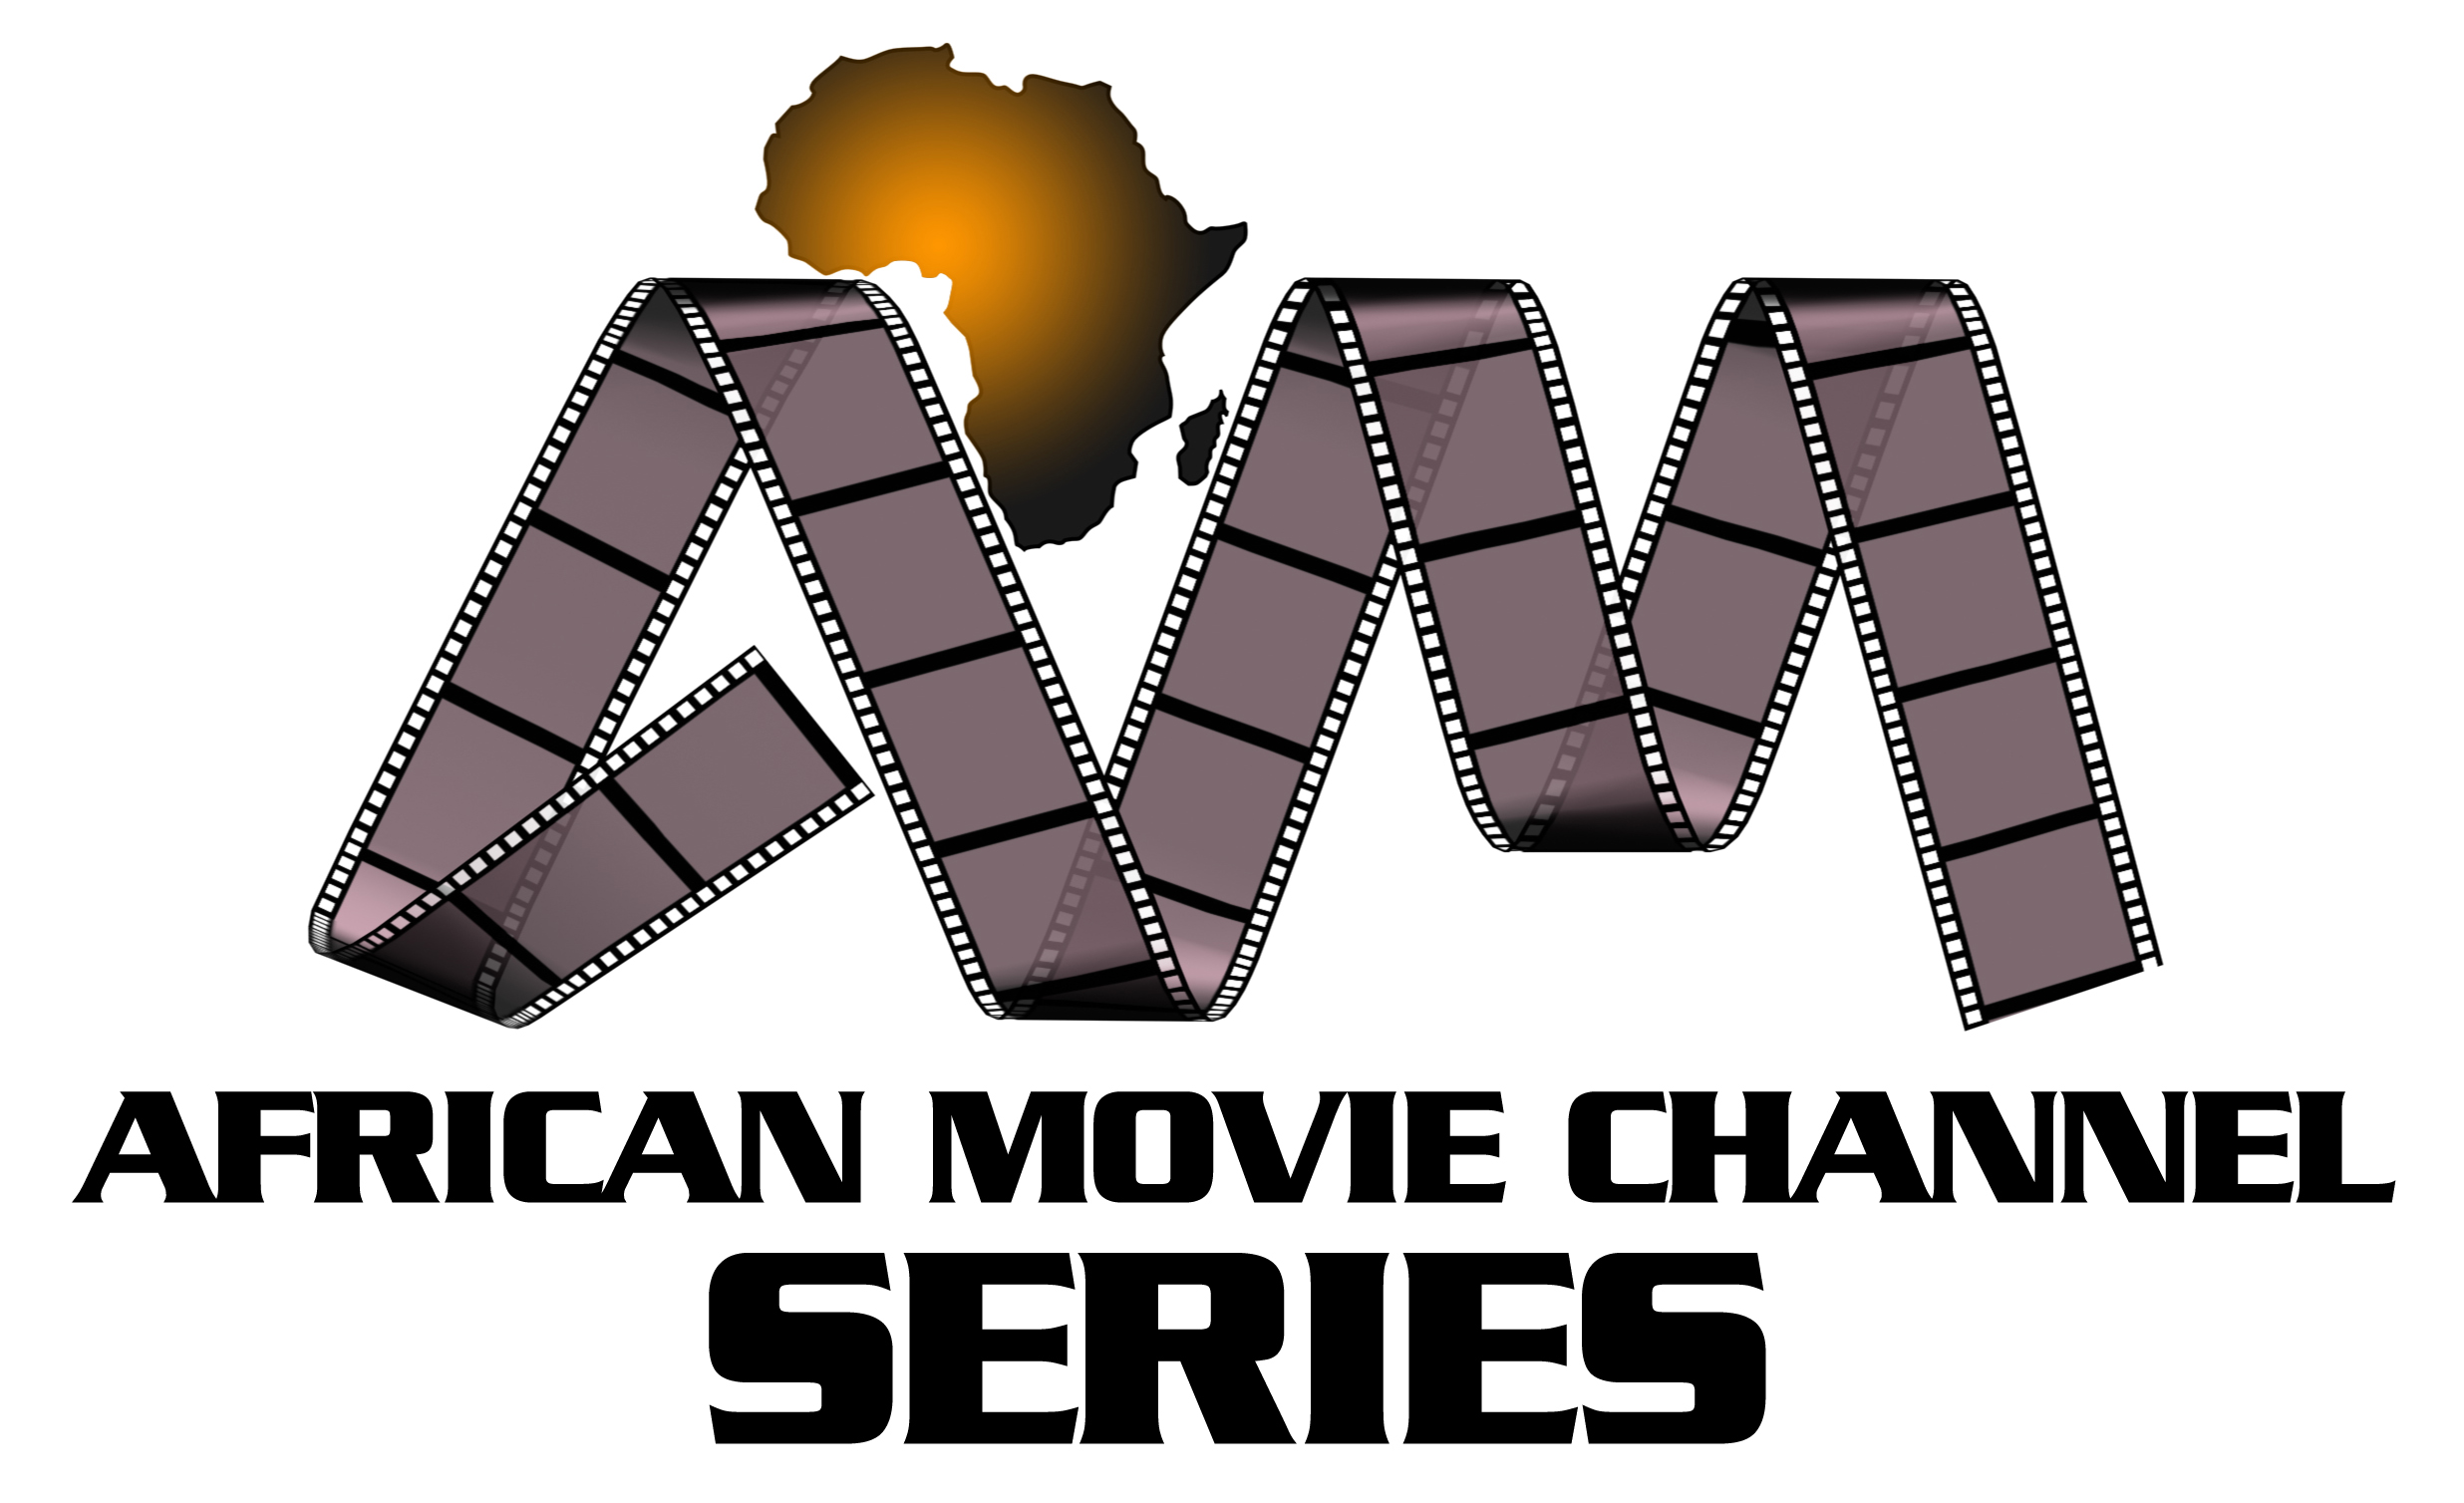 African Movie Channel Series launches on Zuku - Digital TV Europe